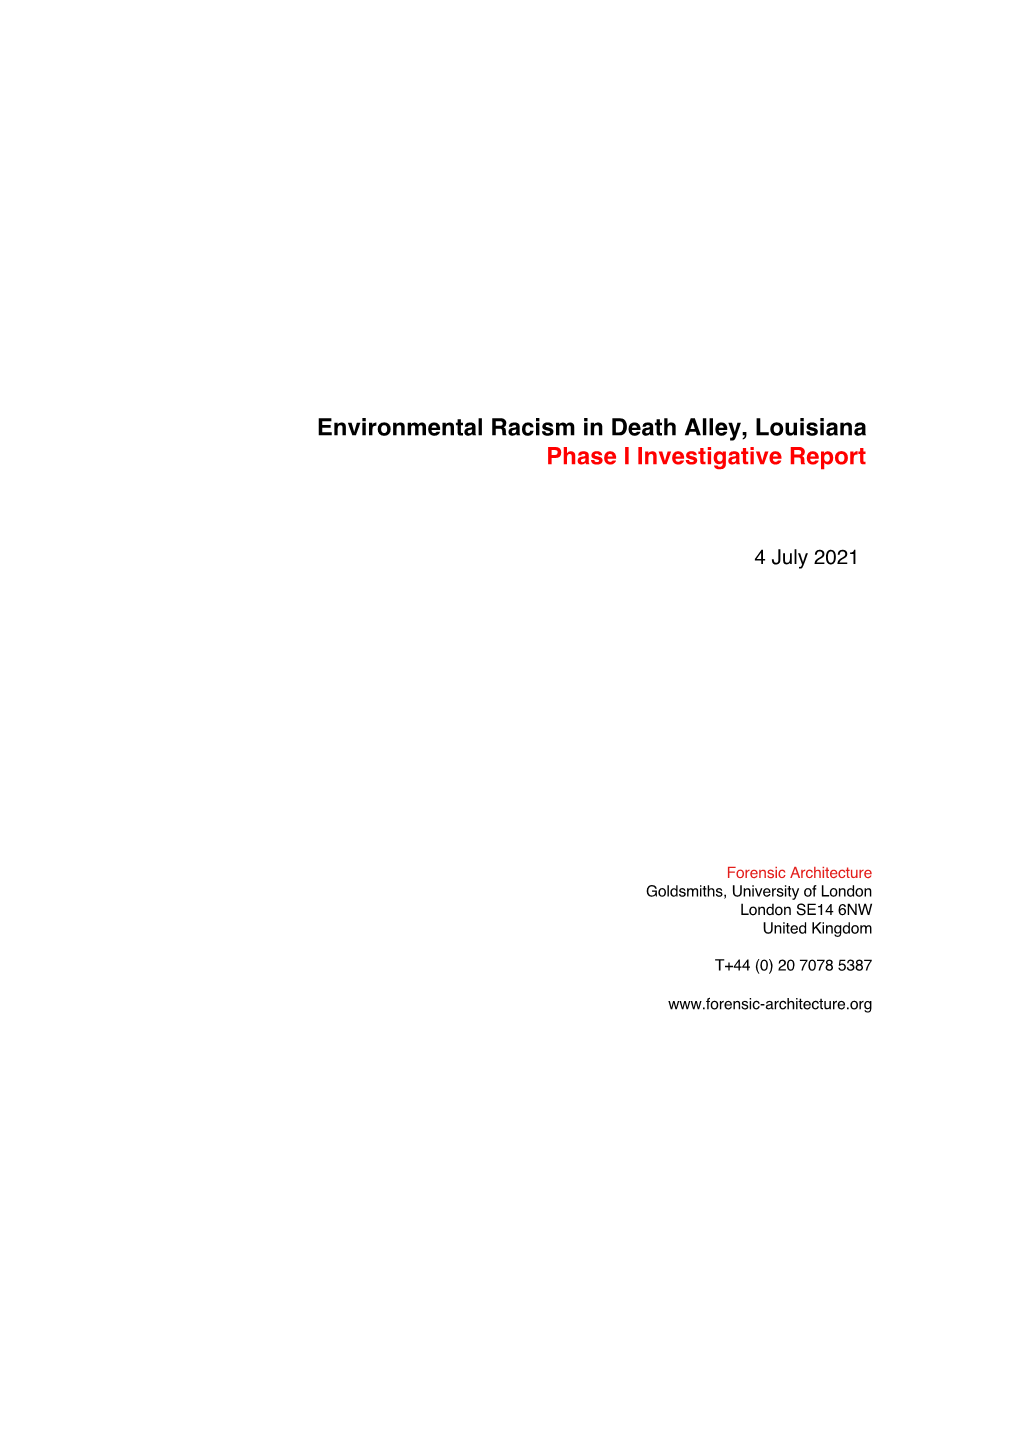 Environmental Racism in Death Alley, Louisiana Phase I Investigative Report